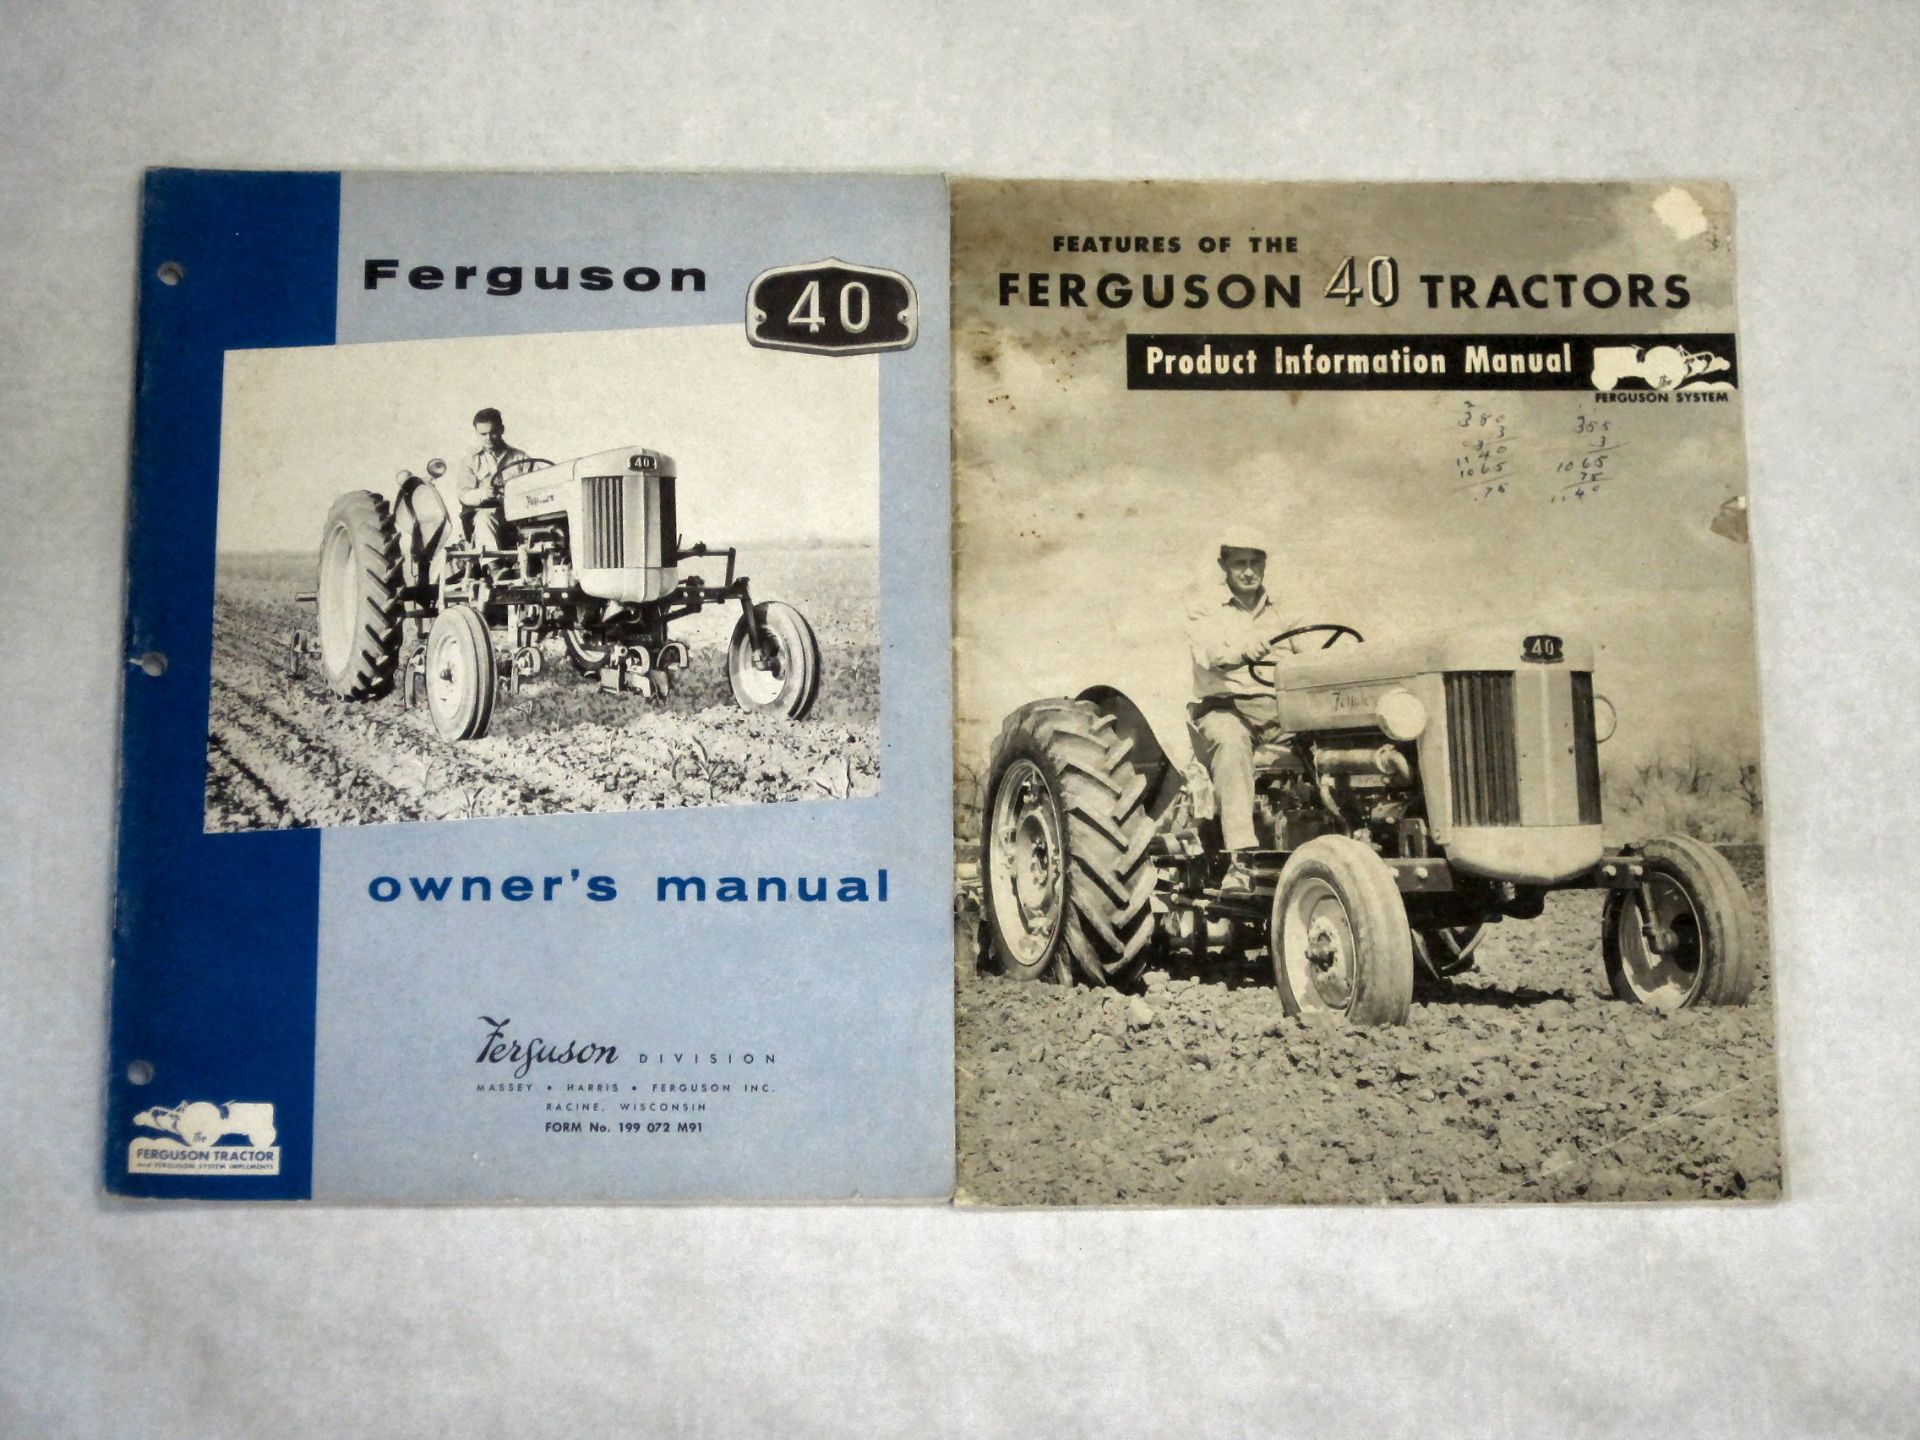 Ferguson 40 66pp Owners Manual t/w 21pp Production Information Manual (2)